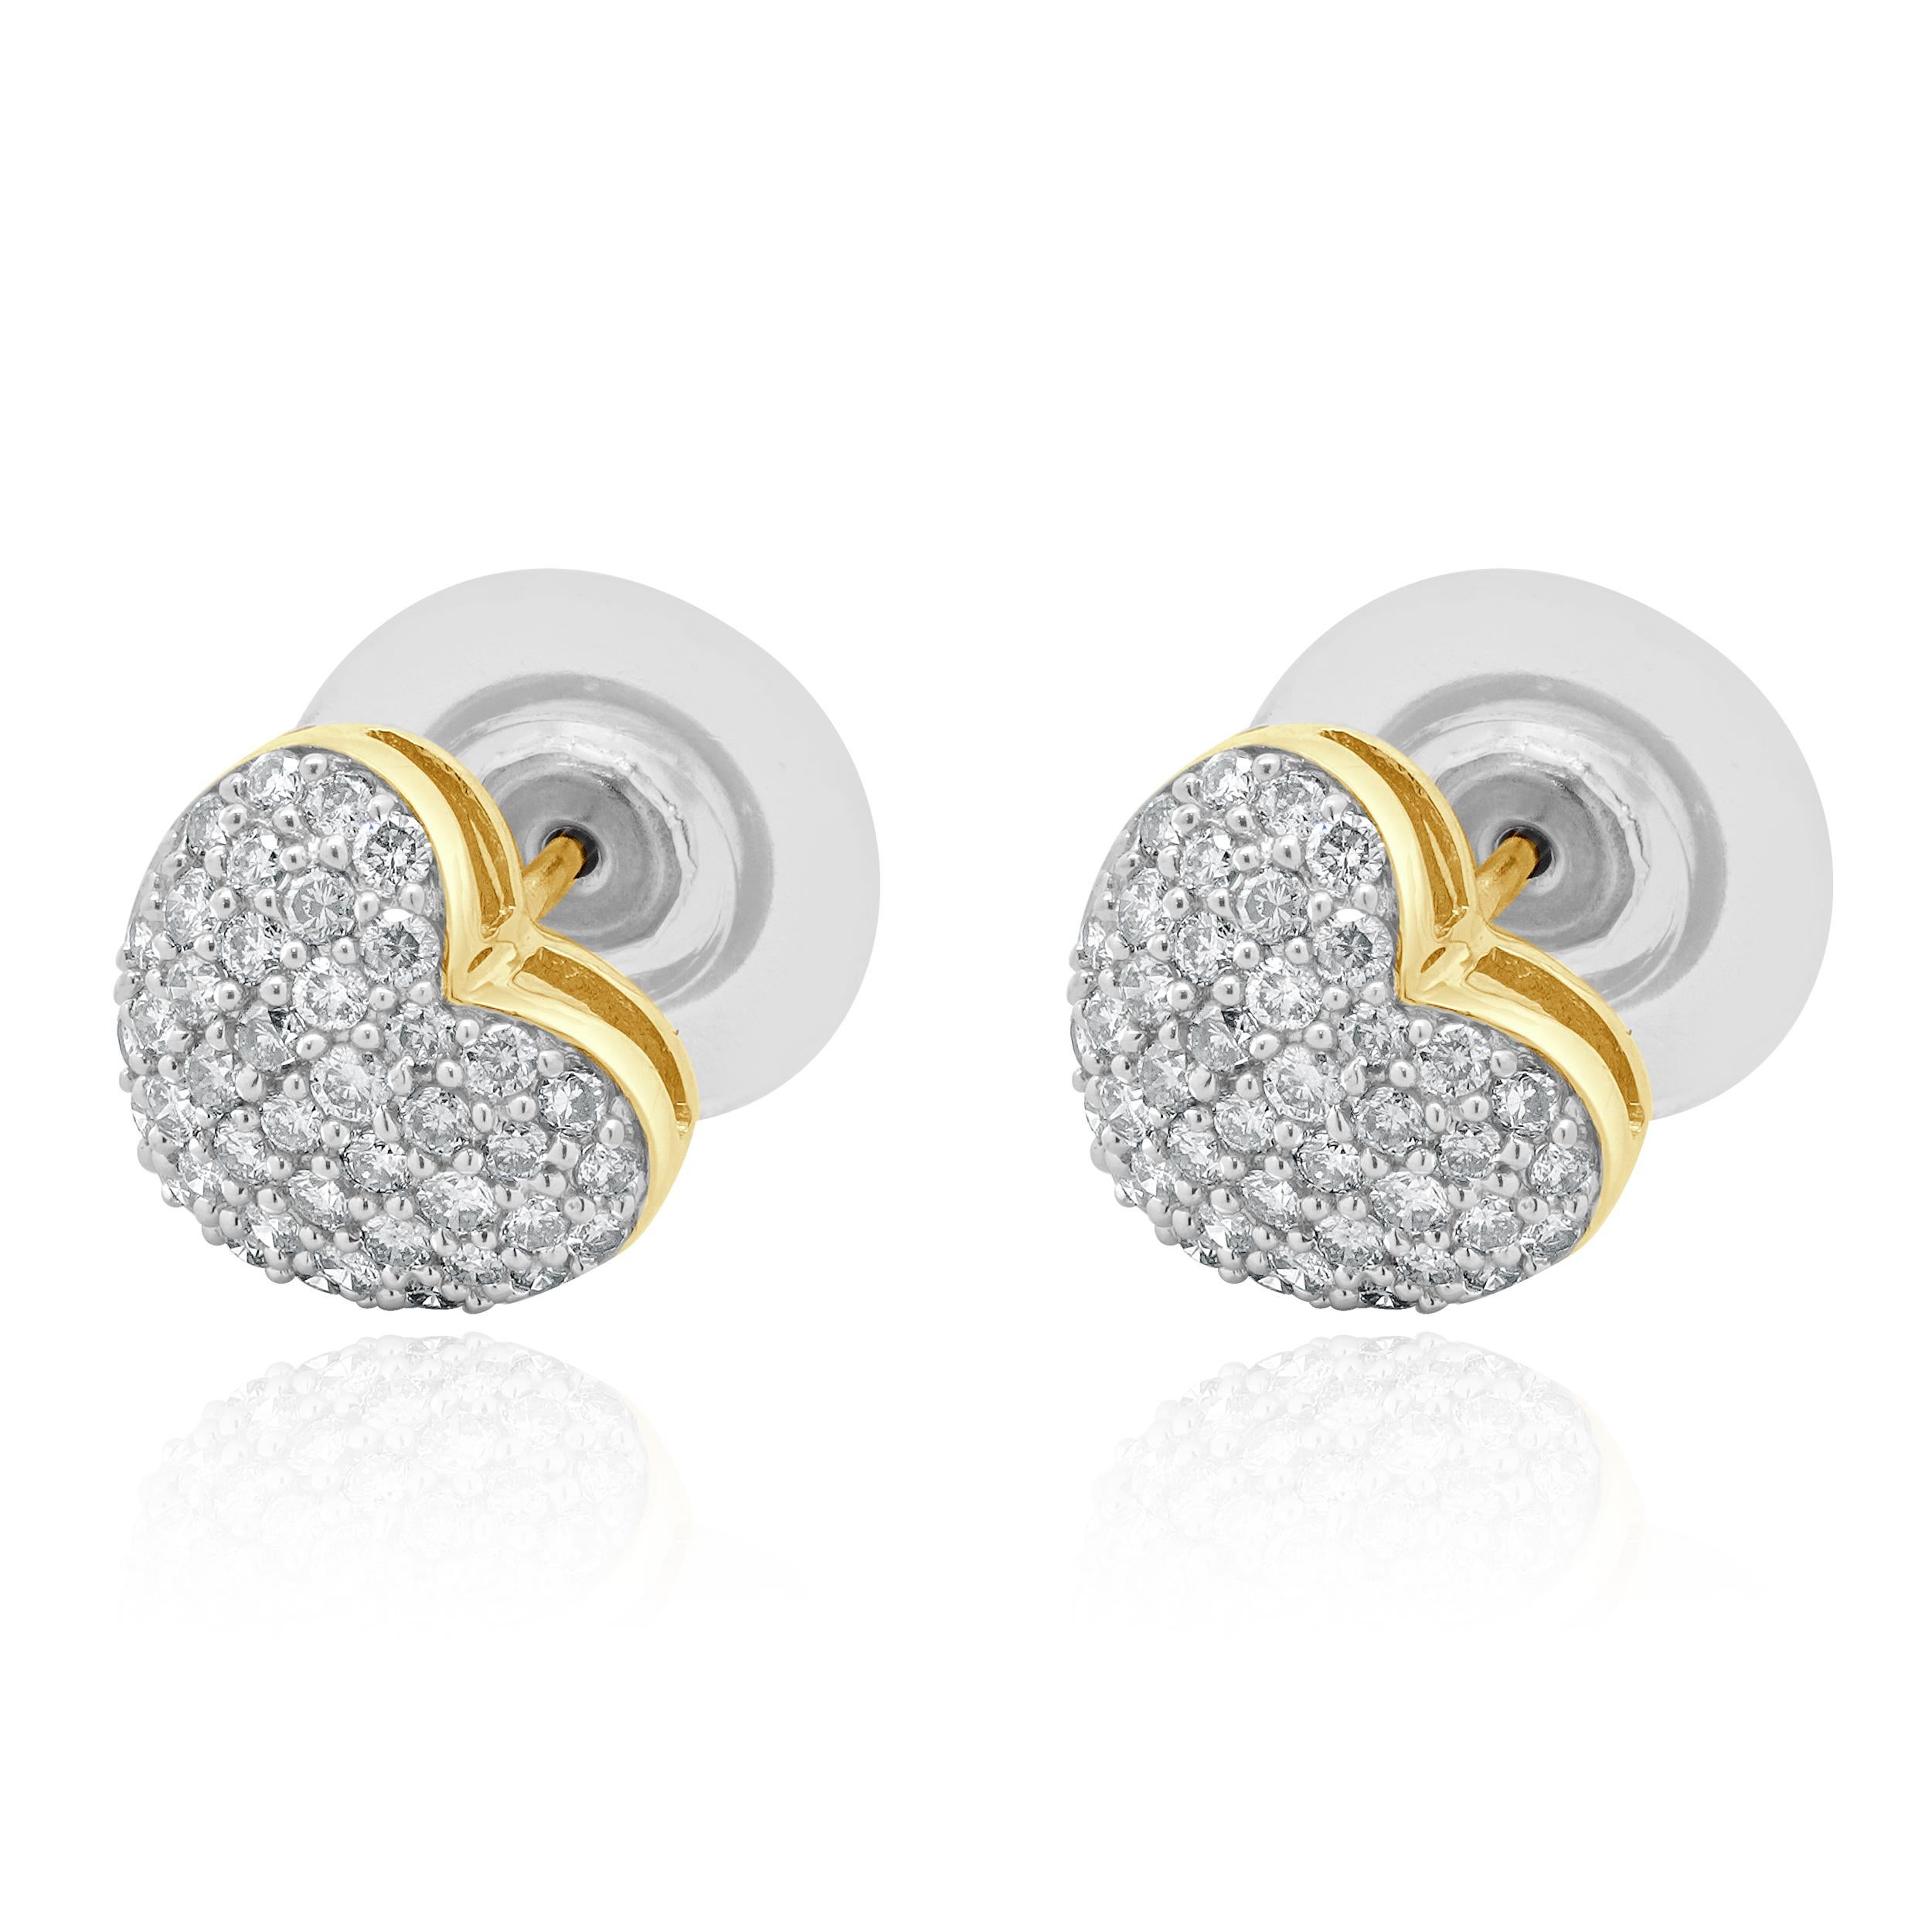 14 Karat Yellow Gold Pave Diamond Heart Stud Earrings In Excellent Condition For Sale In Scottsdale, AZ